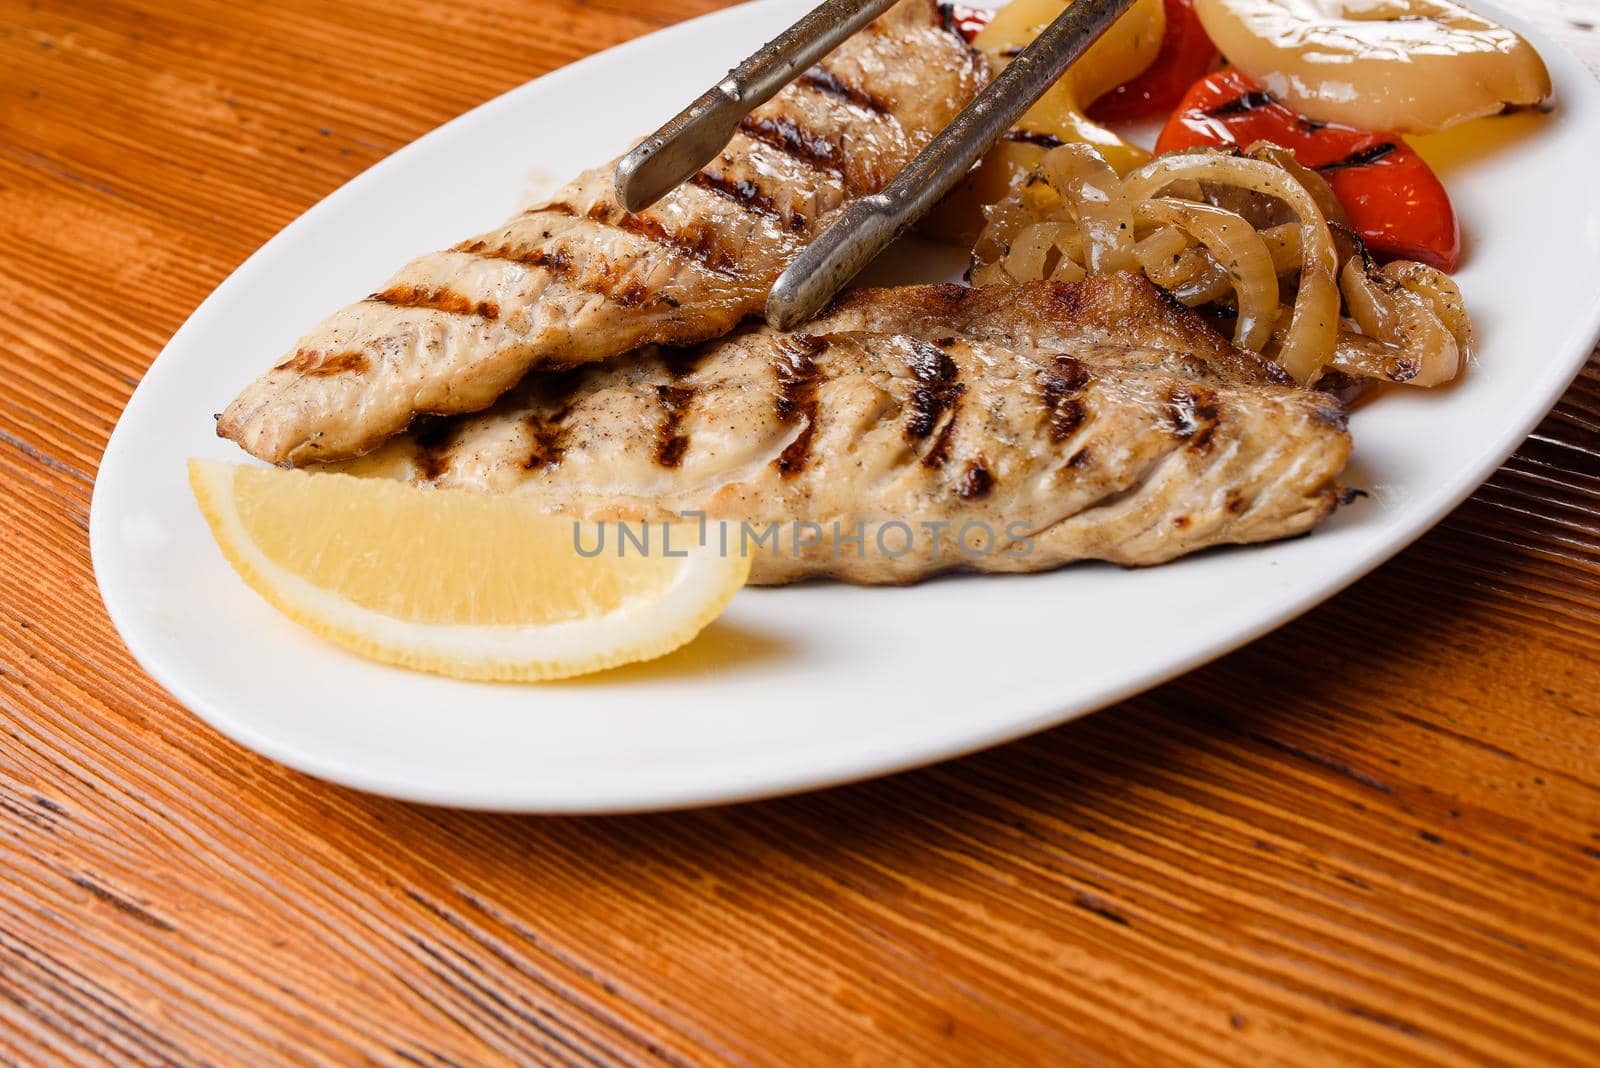 Chicken fillet and grilled vegetables with lemon on a white plate on a wooden table. Serving the dish with metal tongs.